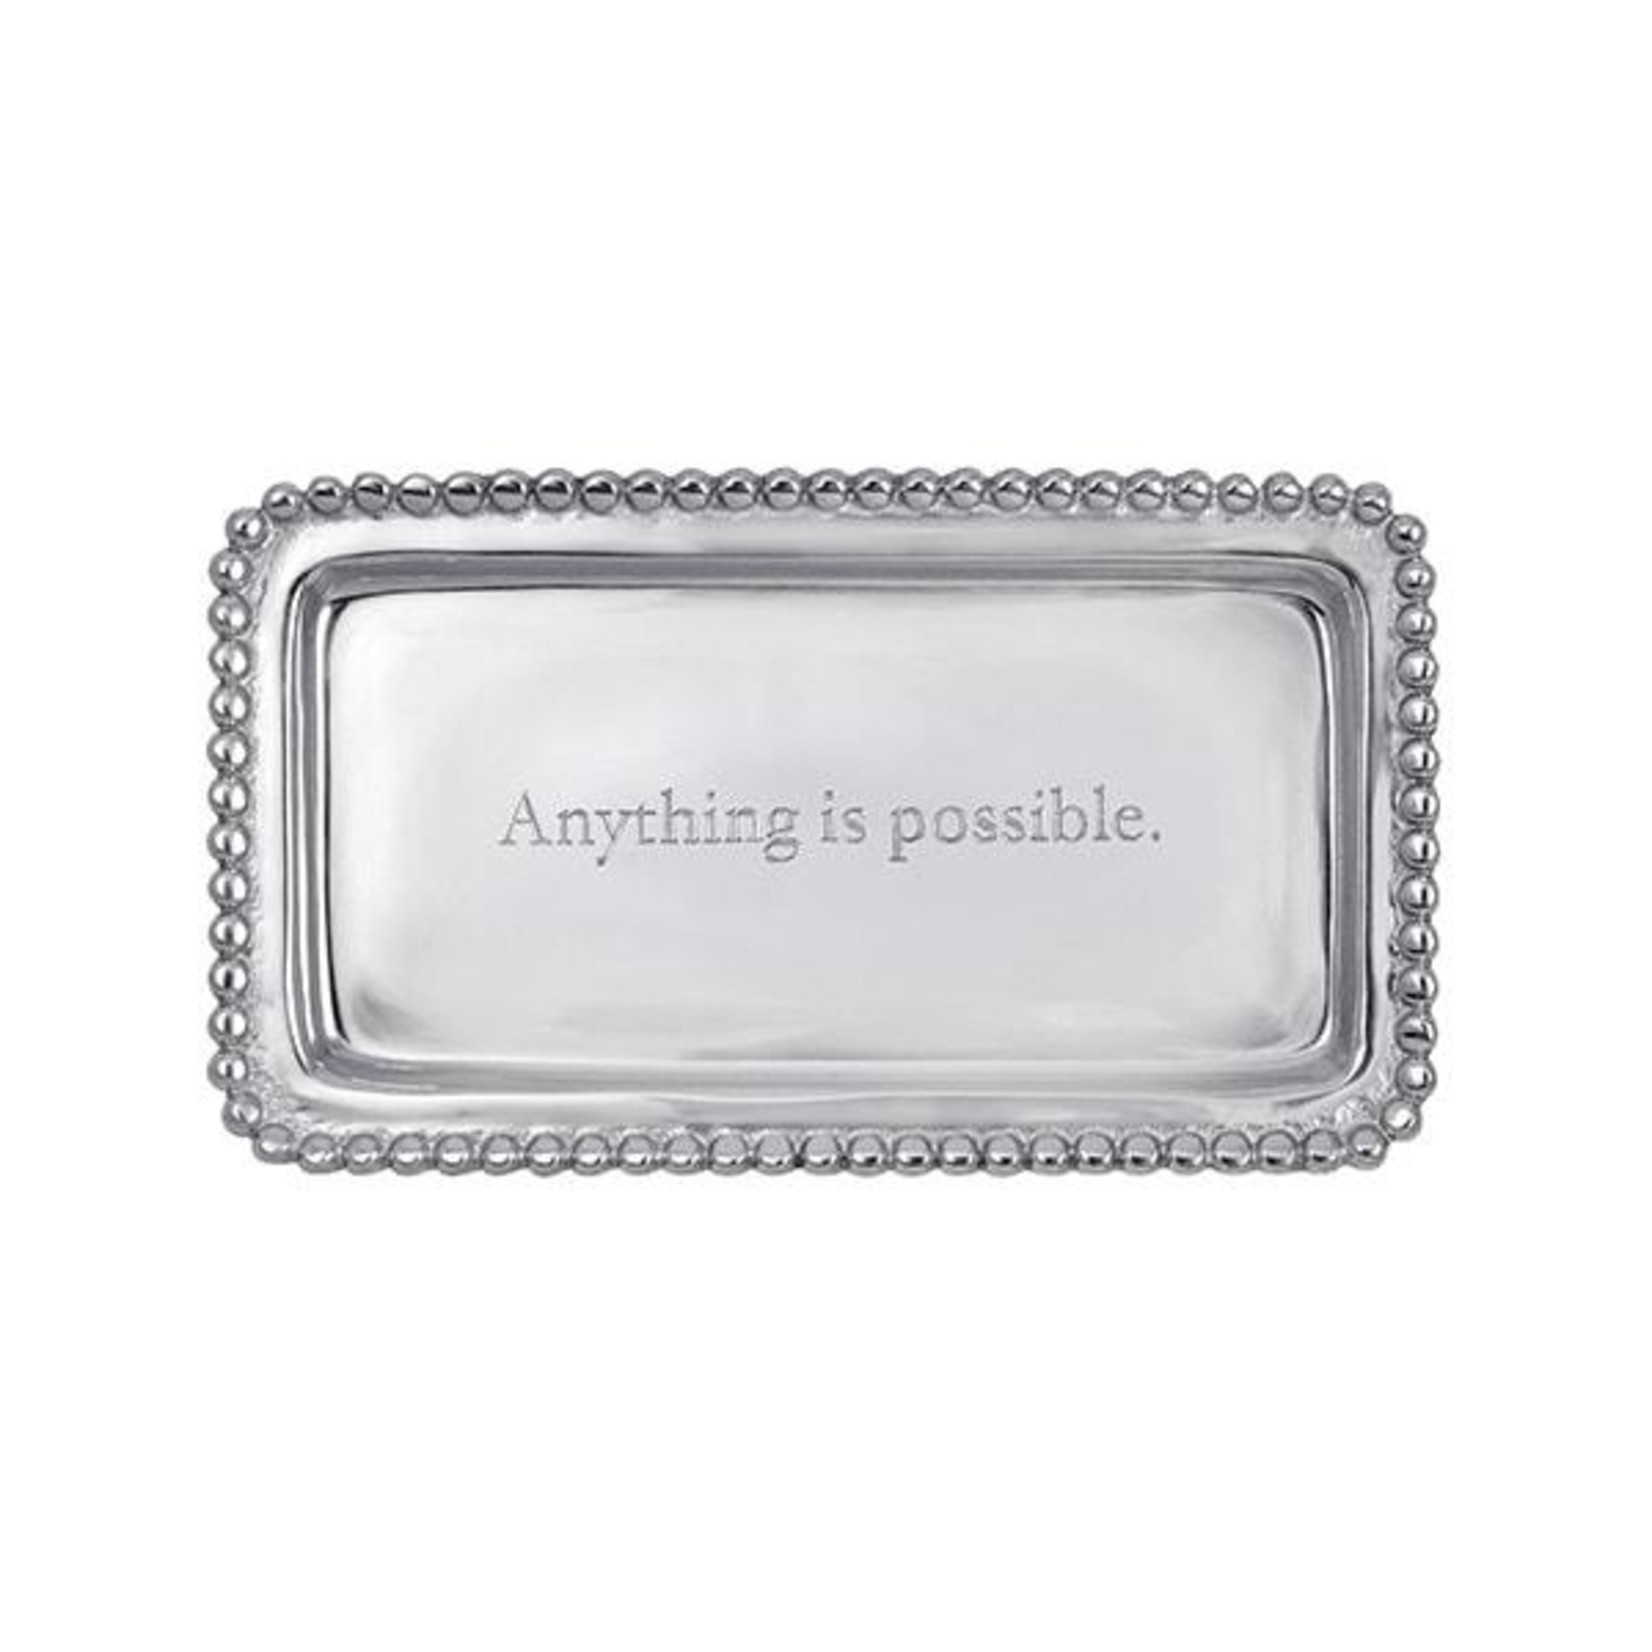 Mariposa Mariposa - Beaded Statement Tray - Anything is Possible